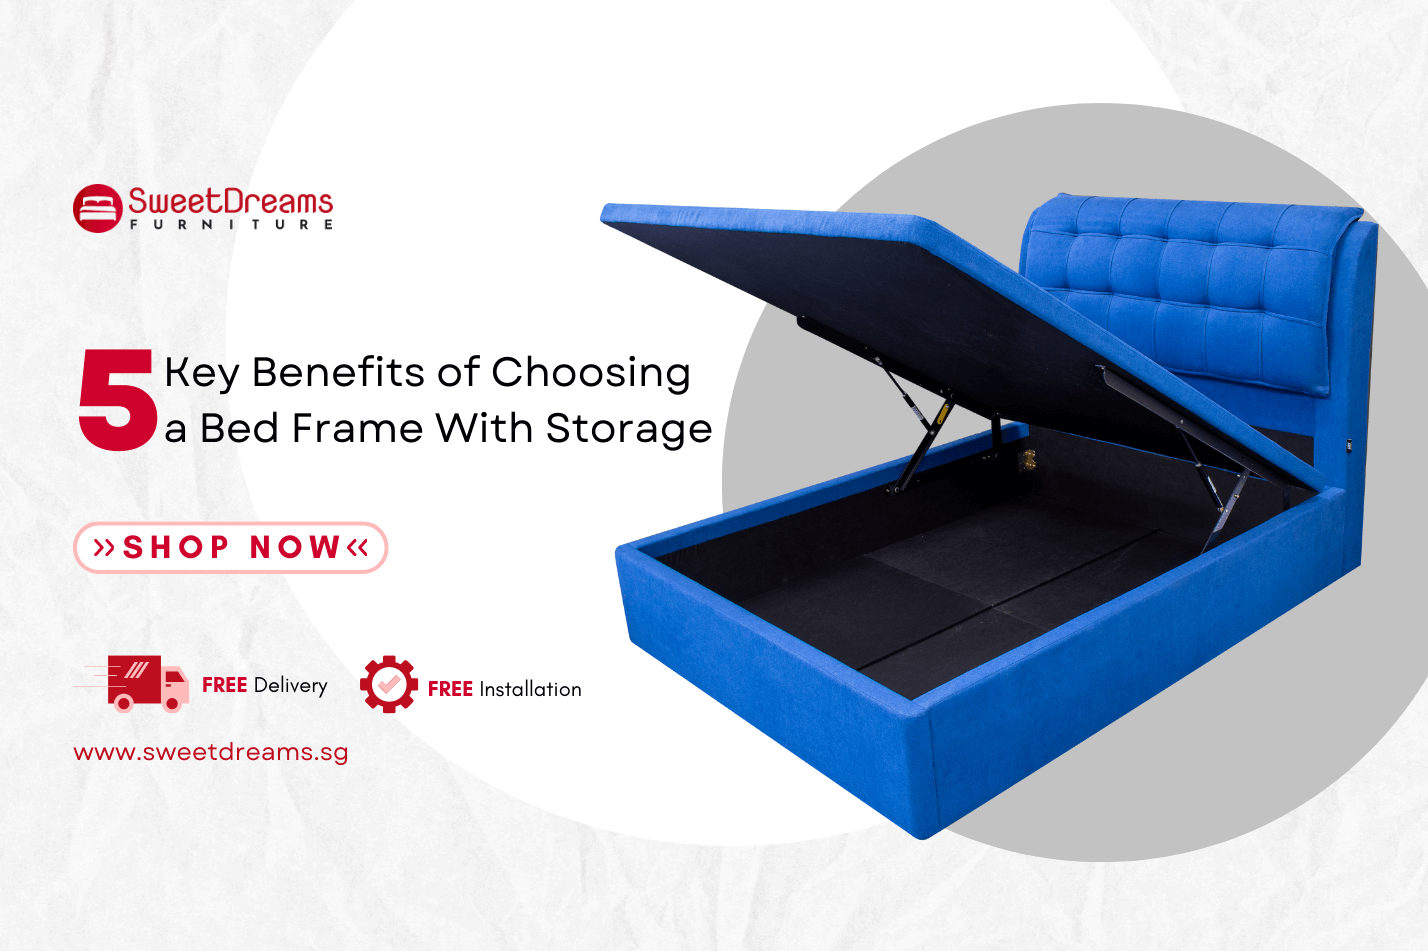 5 Key Benefits of Choosing a Bed Frame With Storage